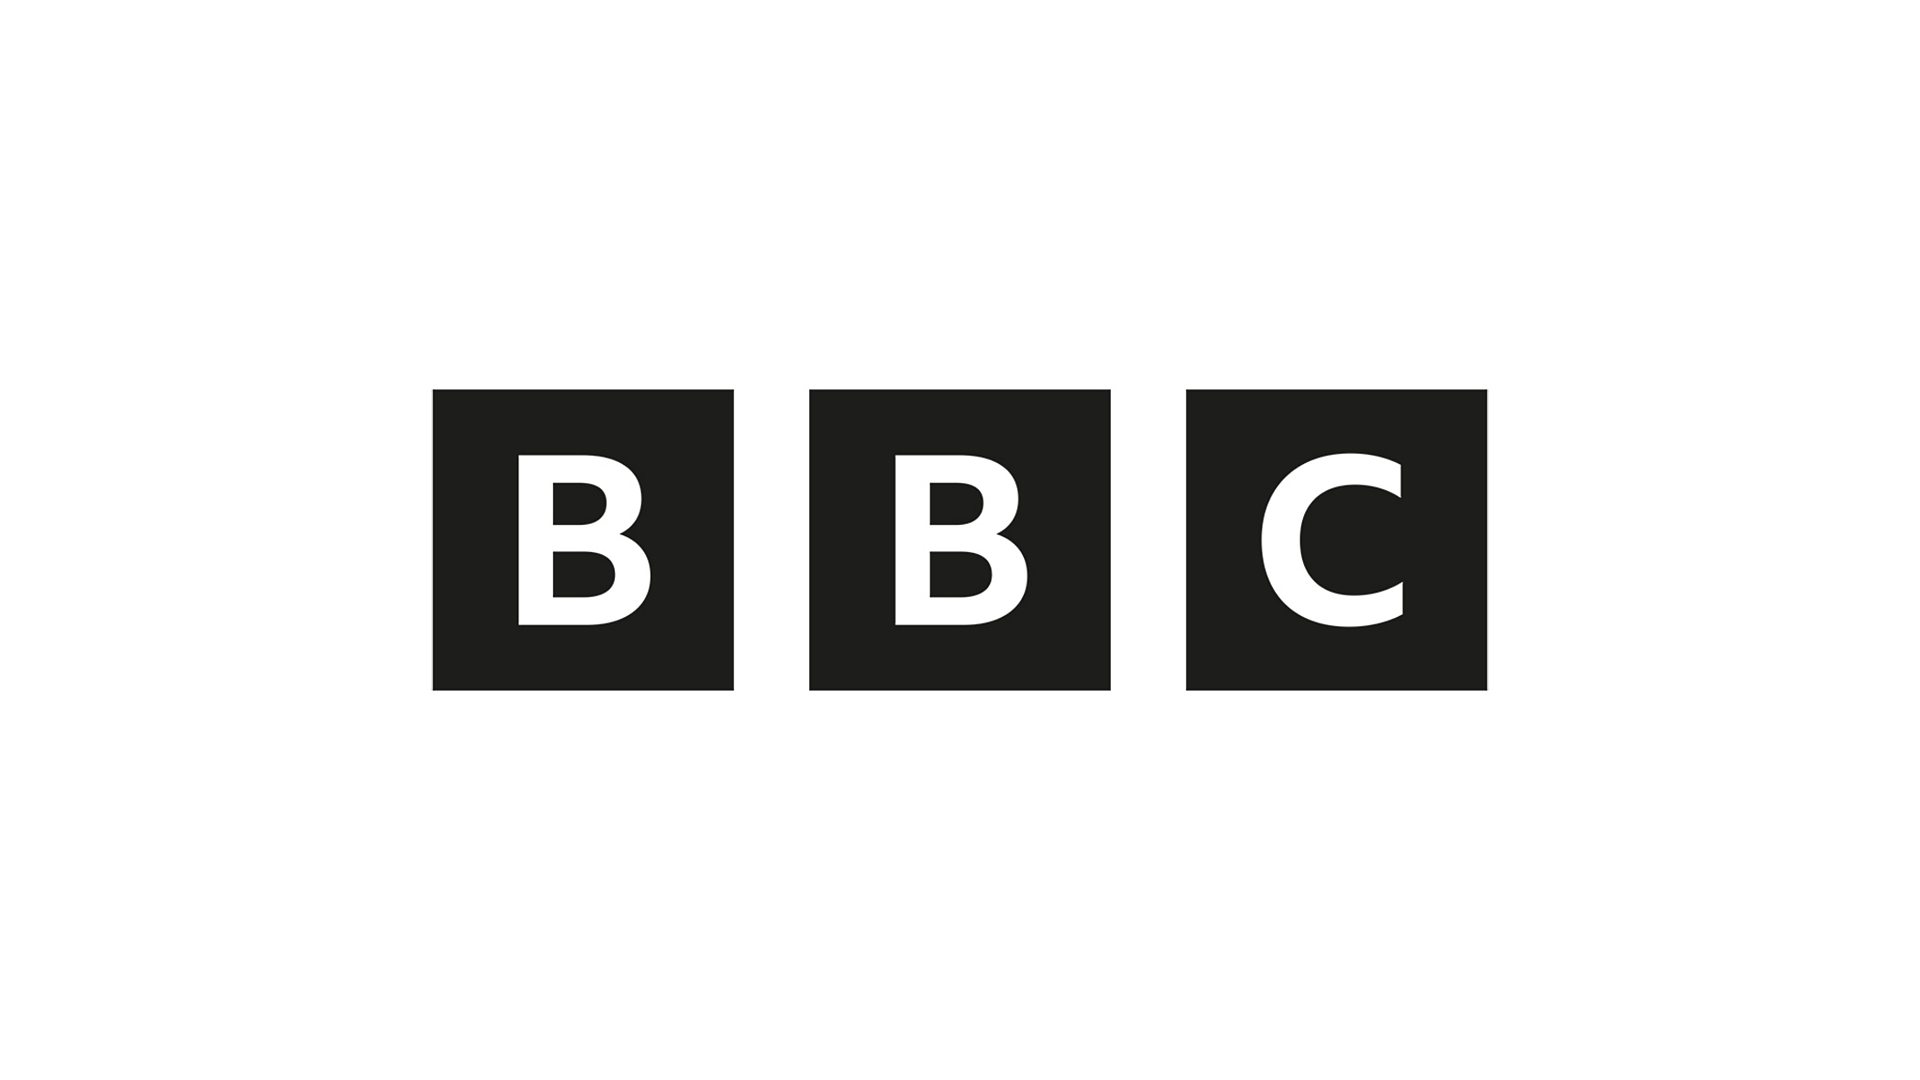 QnA VBage The BBC says it is running 12 generative AI pilots, including reformatting and translating existing content and a 